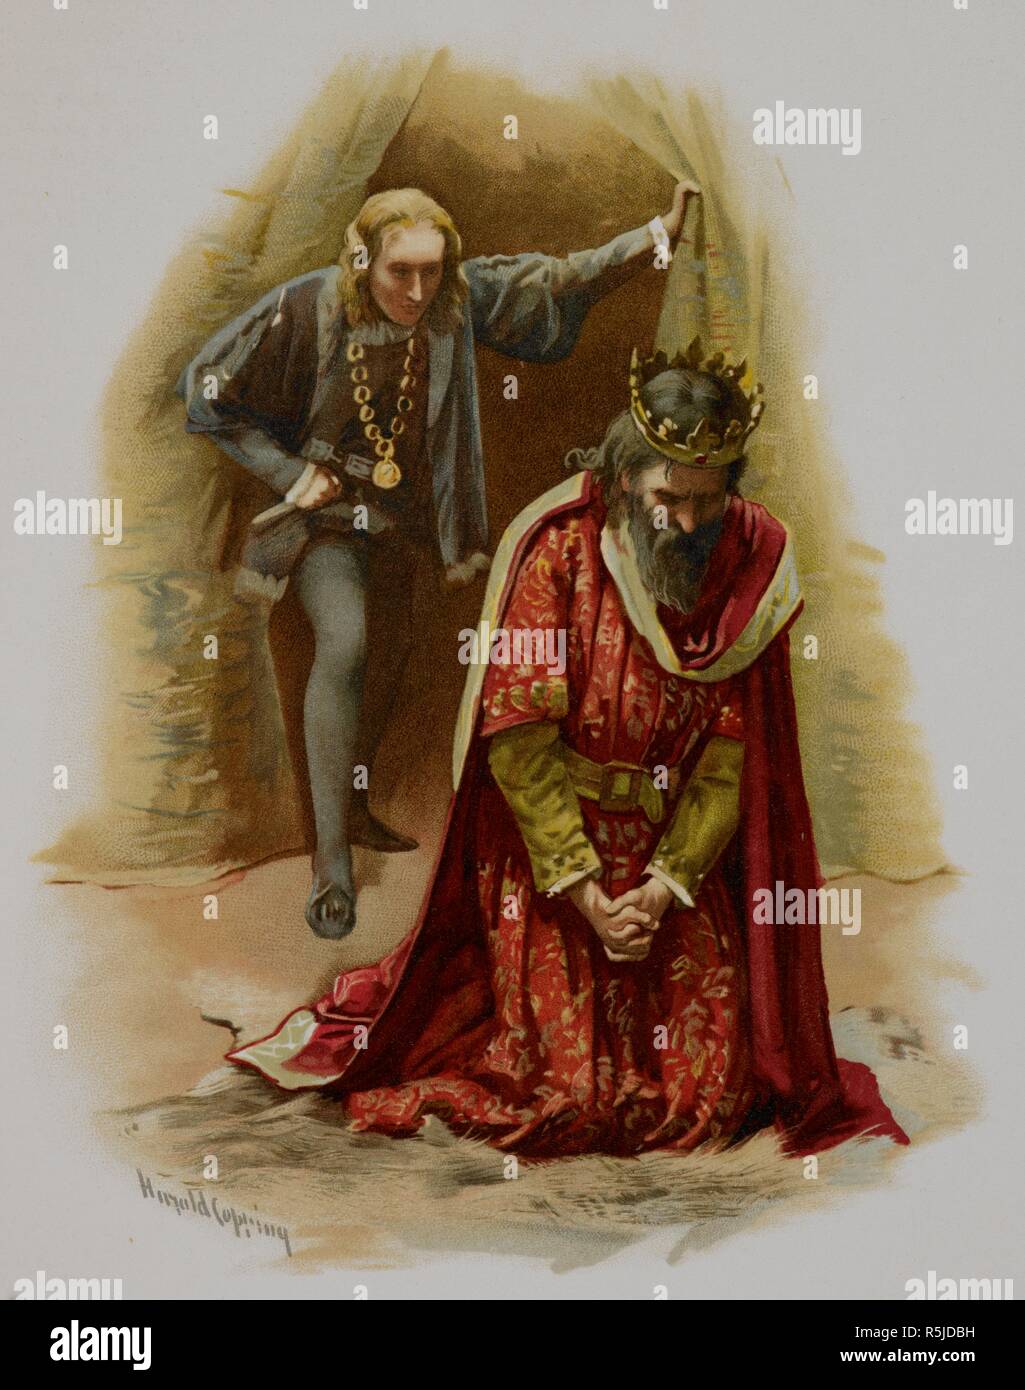 Hamlet considers killing the King, Claudius, who is kneeling, in prayer. Act III, scene IV, from 'Hamlet'. Hamlet. Tuck & Sons: London, 1897. colour illustration. Source: 11764.m.9, opposite 44. Language: English. Author: SHAKESPEARE, WILLIAM. Copping, Harold. Stock Photo